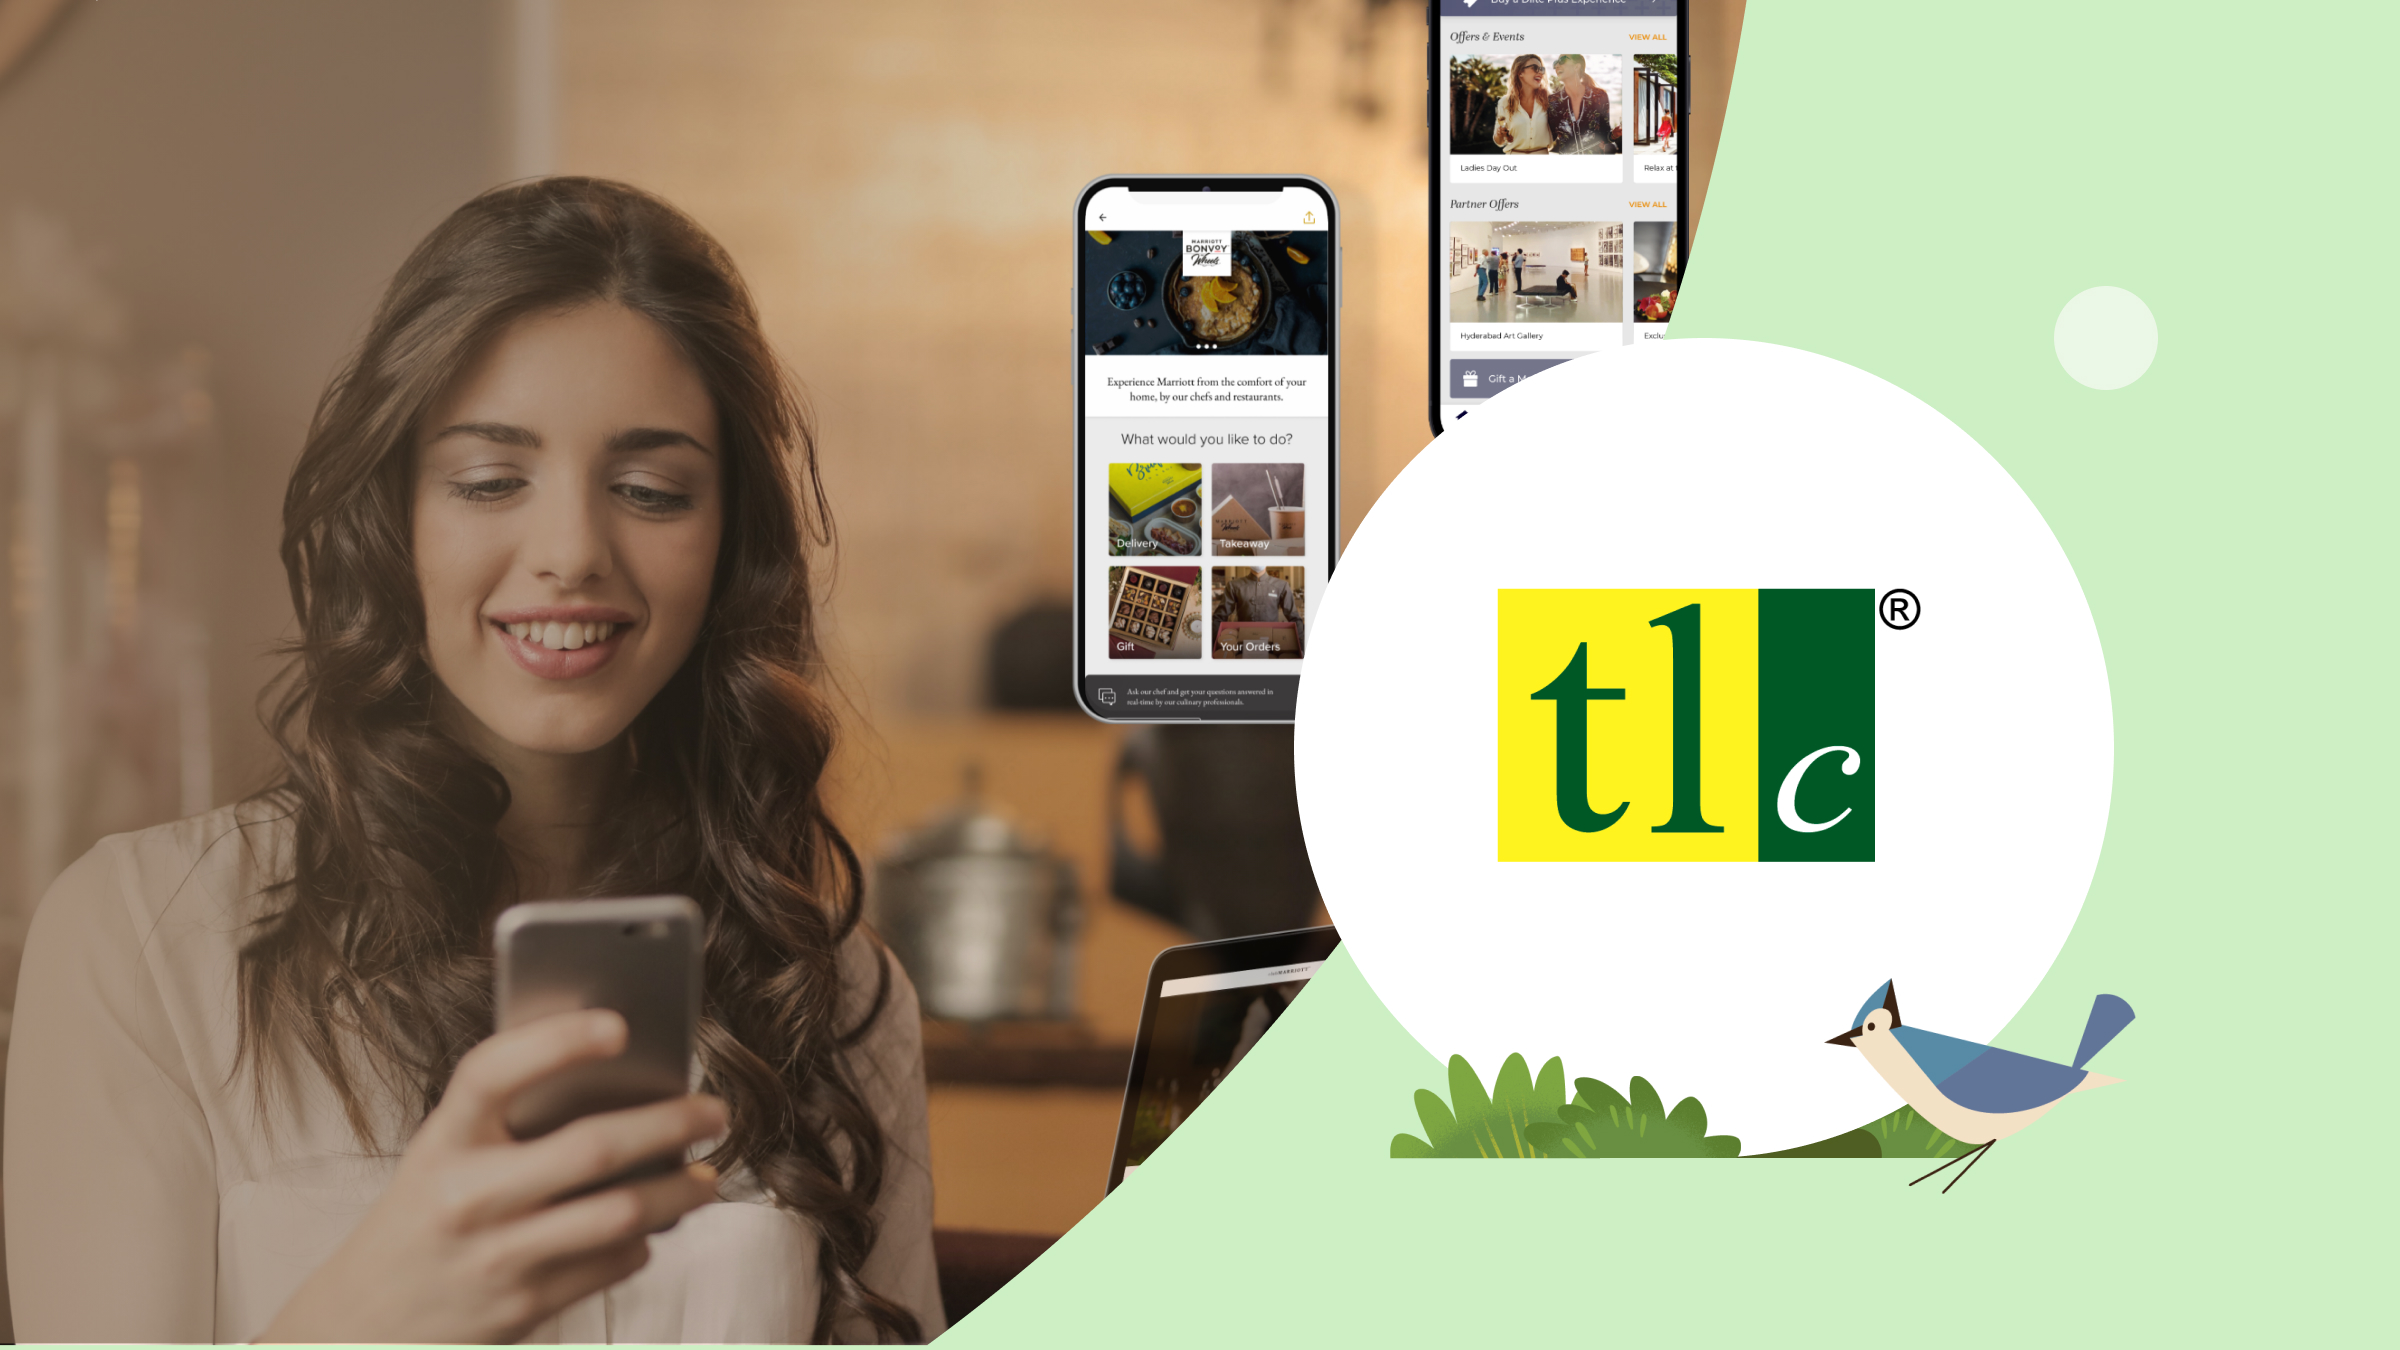 TLC DigiTech helps leading hotels better monetise their customers and build loyalty